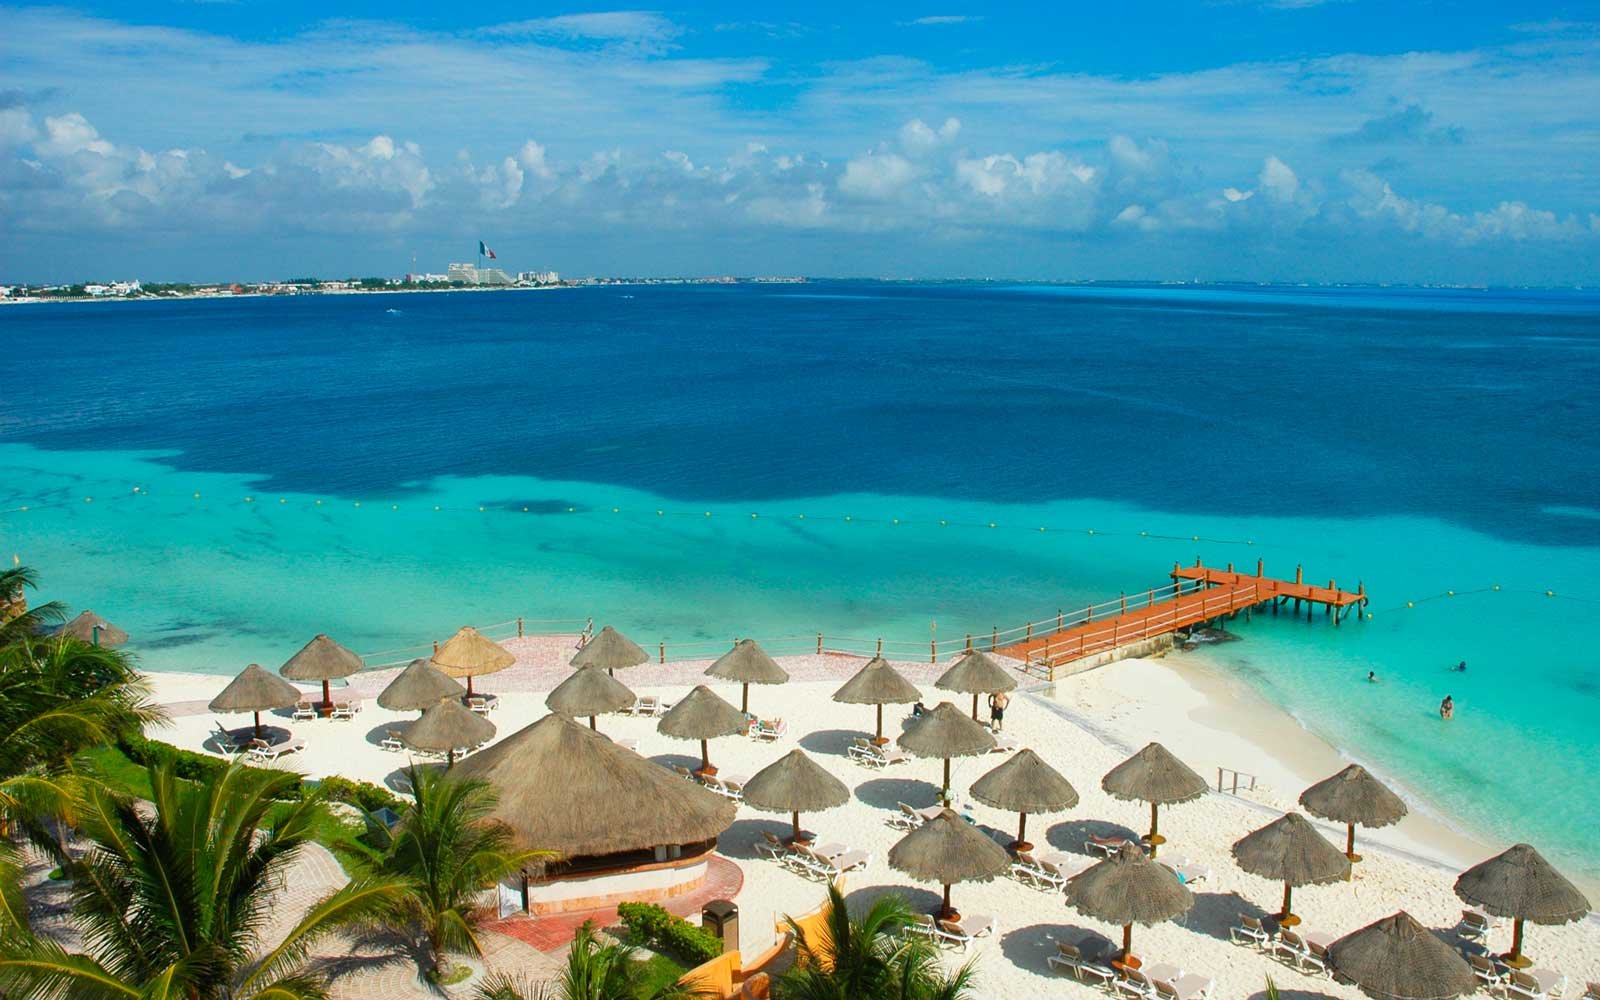 Denver to Cancun Mexico $202 RT Nonstop Airfares on Frontier Airlines (Travel August - October 2022)